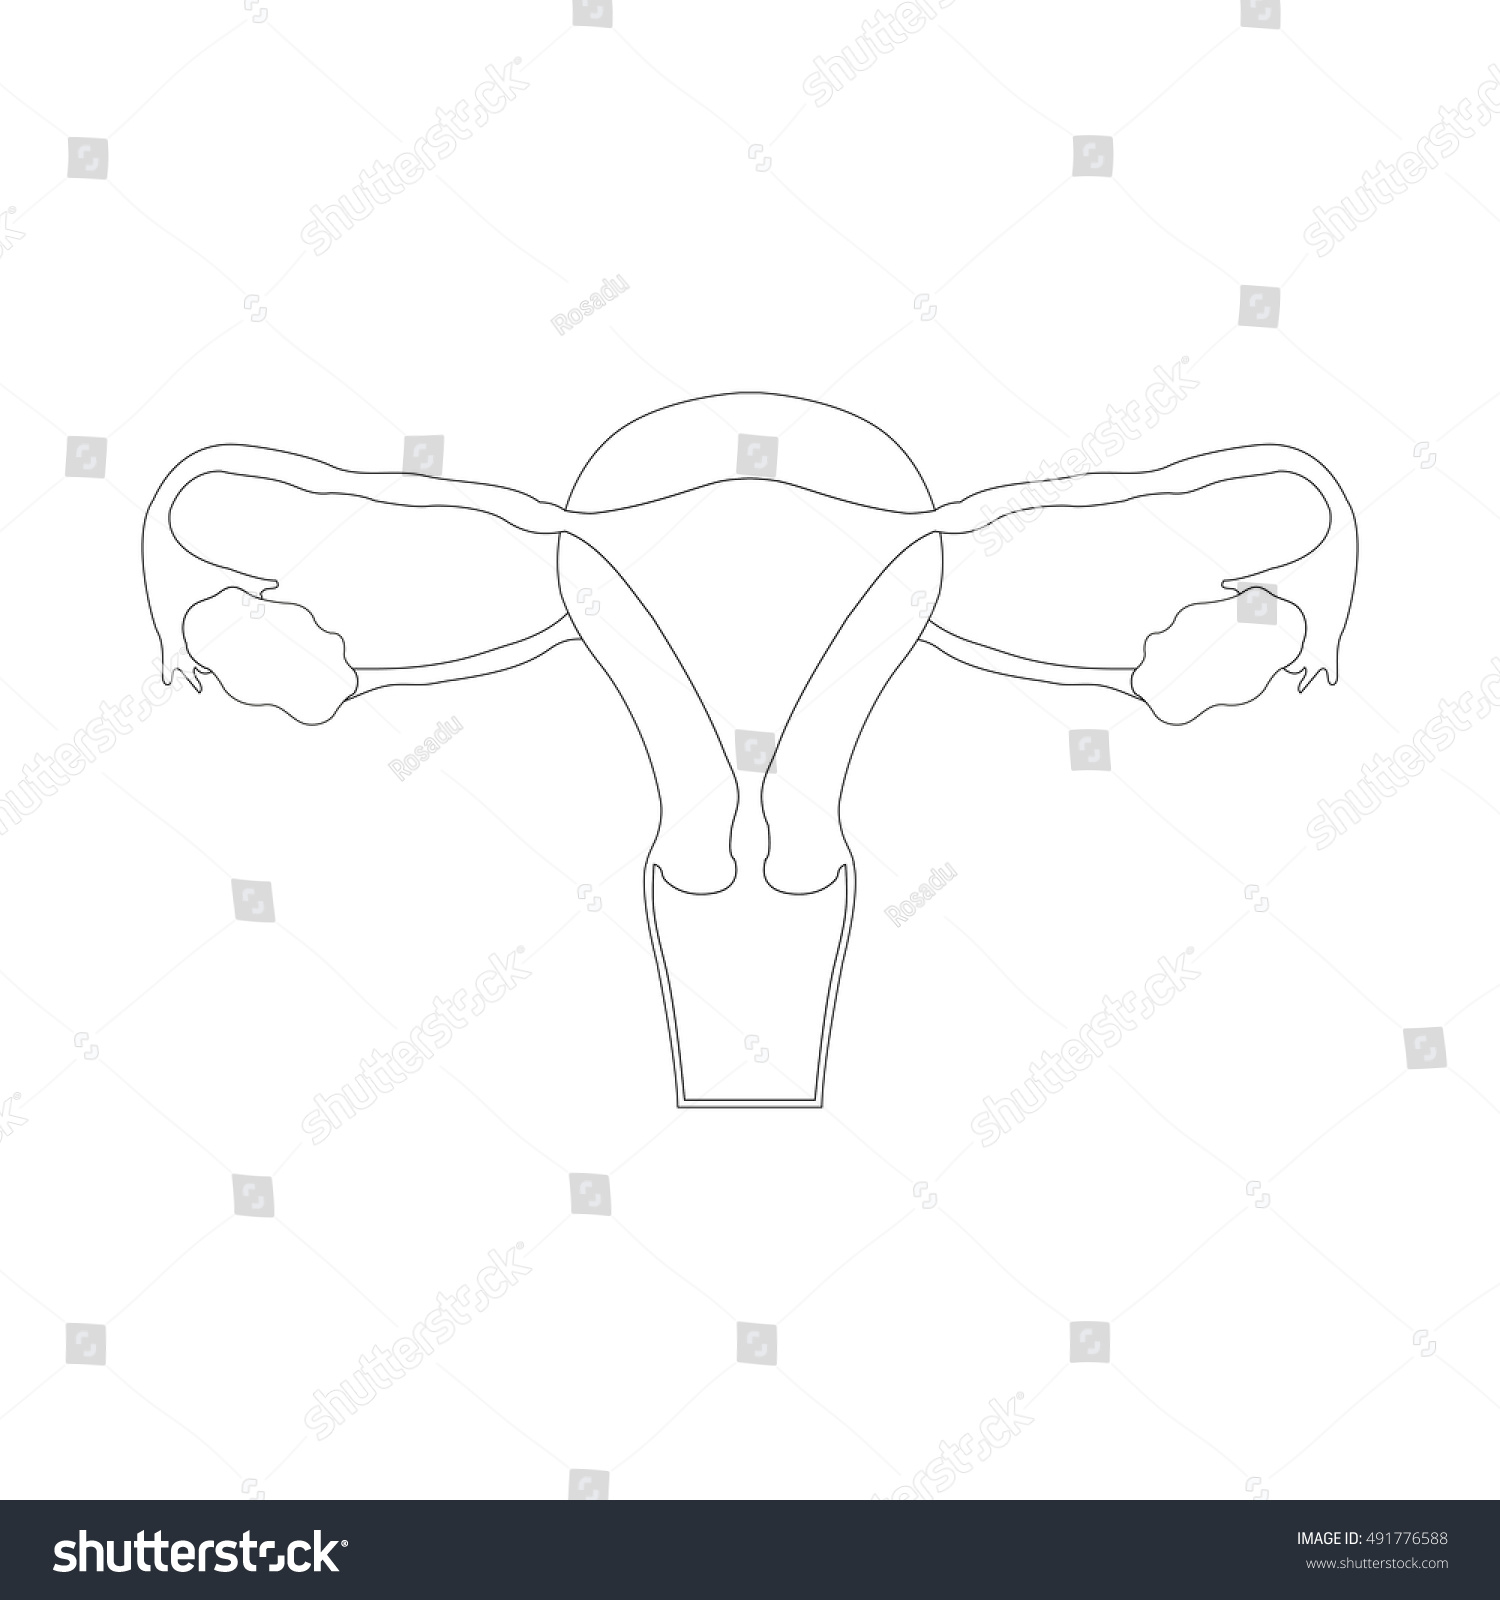 Female Reproductive System Circuit Sketch Hand Drawn Illustration Isolated On White Background 9433